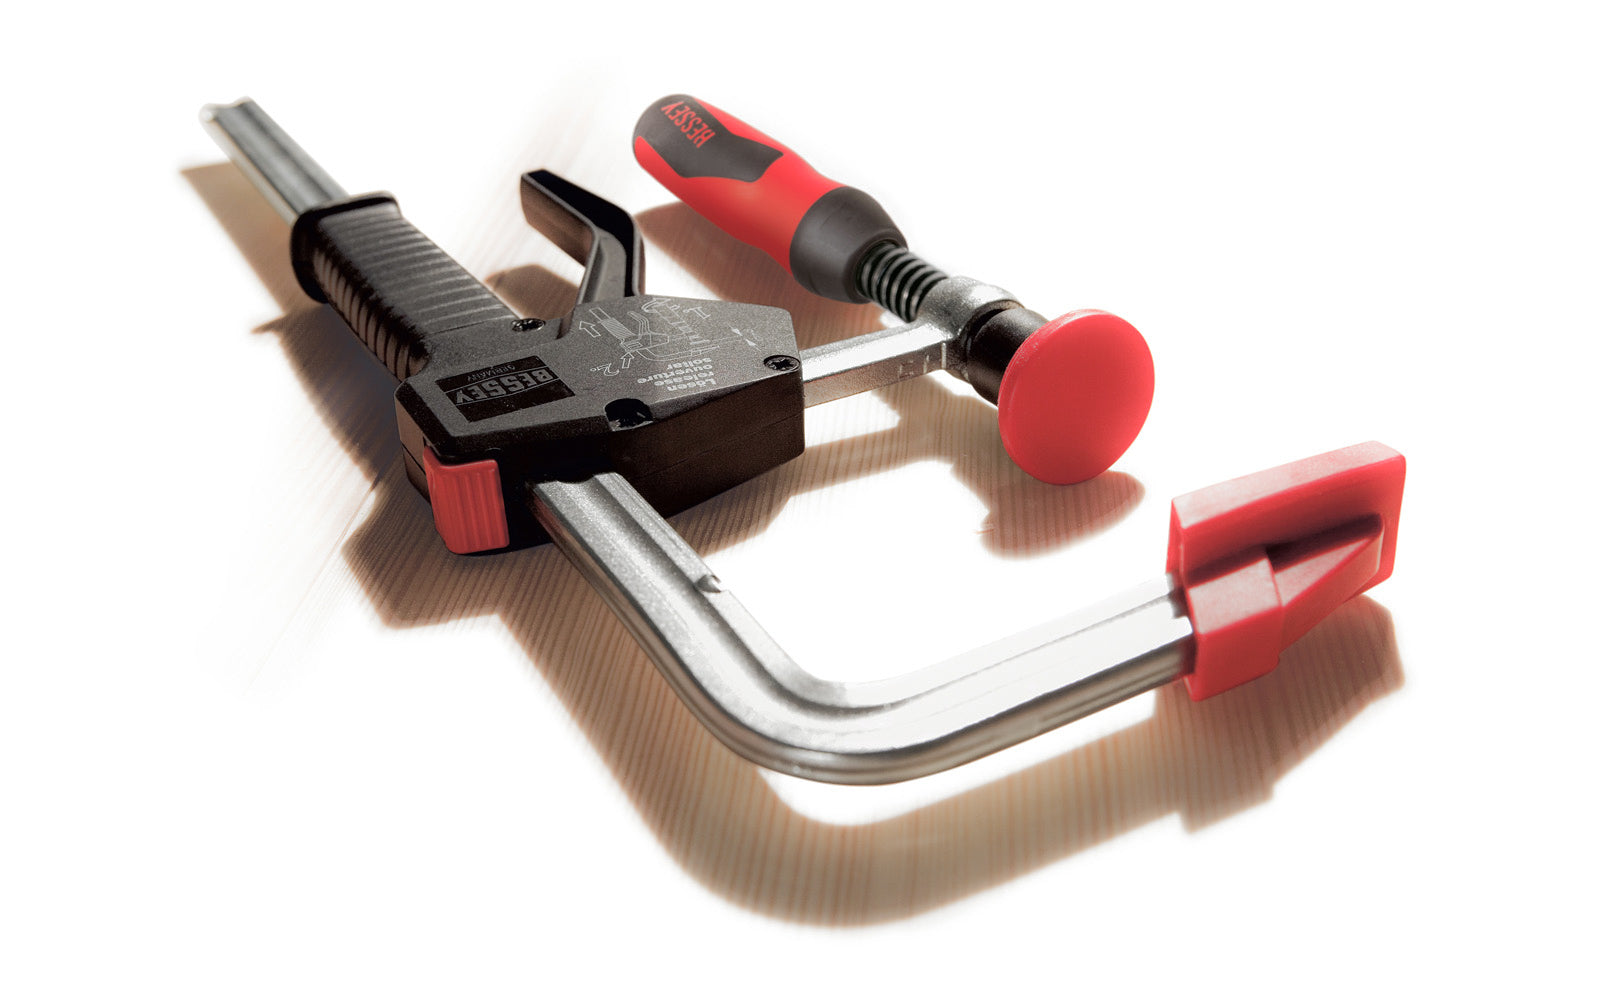 This Bessey 24" HD One-Handed PowerGrip Clamp PG24 is a heavy duty one-handed clamp that is easy to use. To pre-adjust the jaw use the easy slide button to position with just one hand; then squeeze the handle to hold the clamp; and simply turn the handle to apply the full pressure. 24" max opening - 4" throat depth.